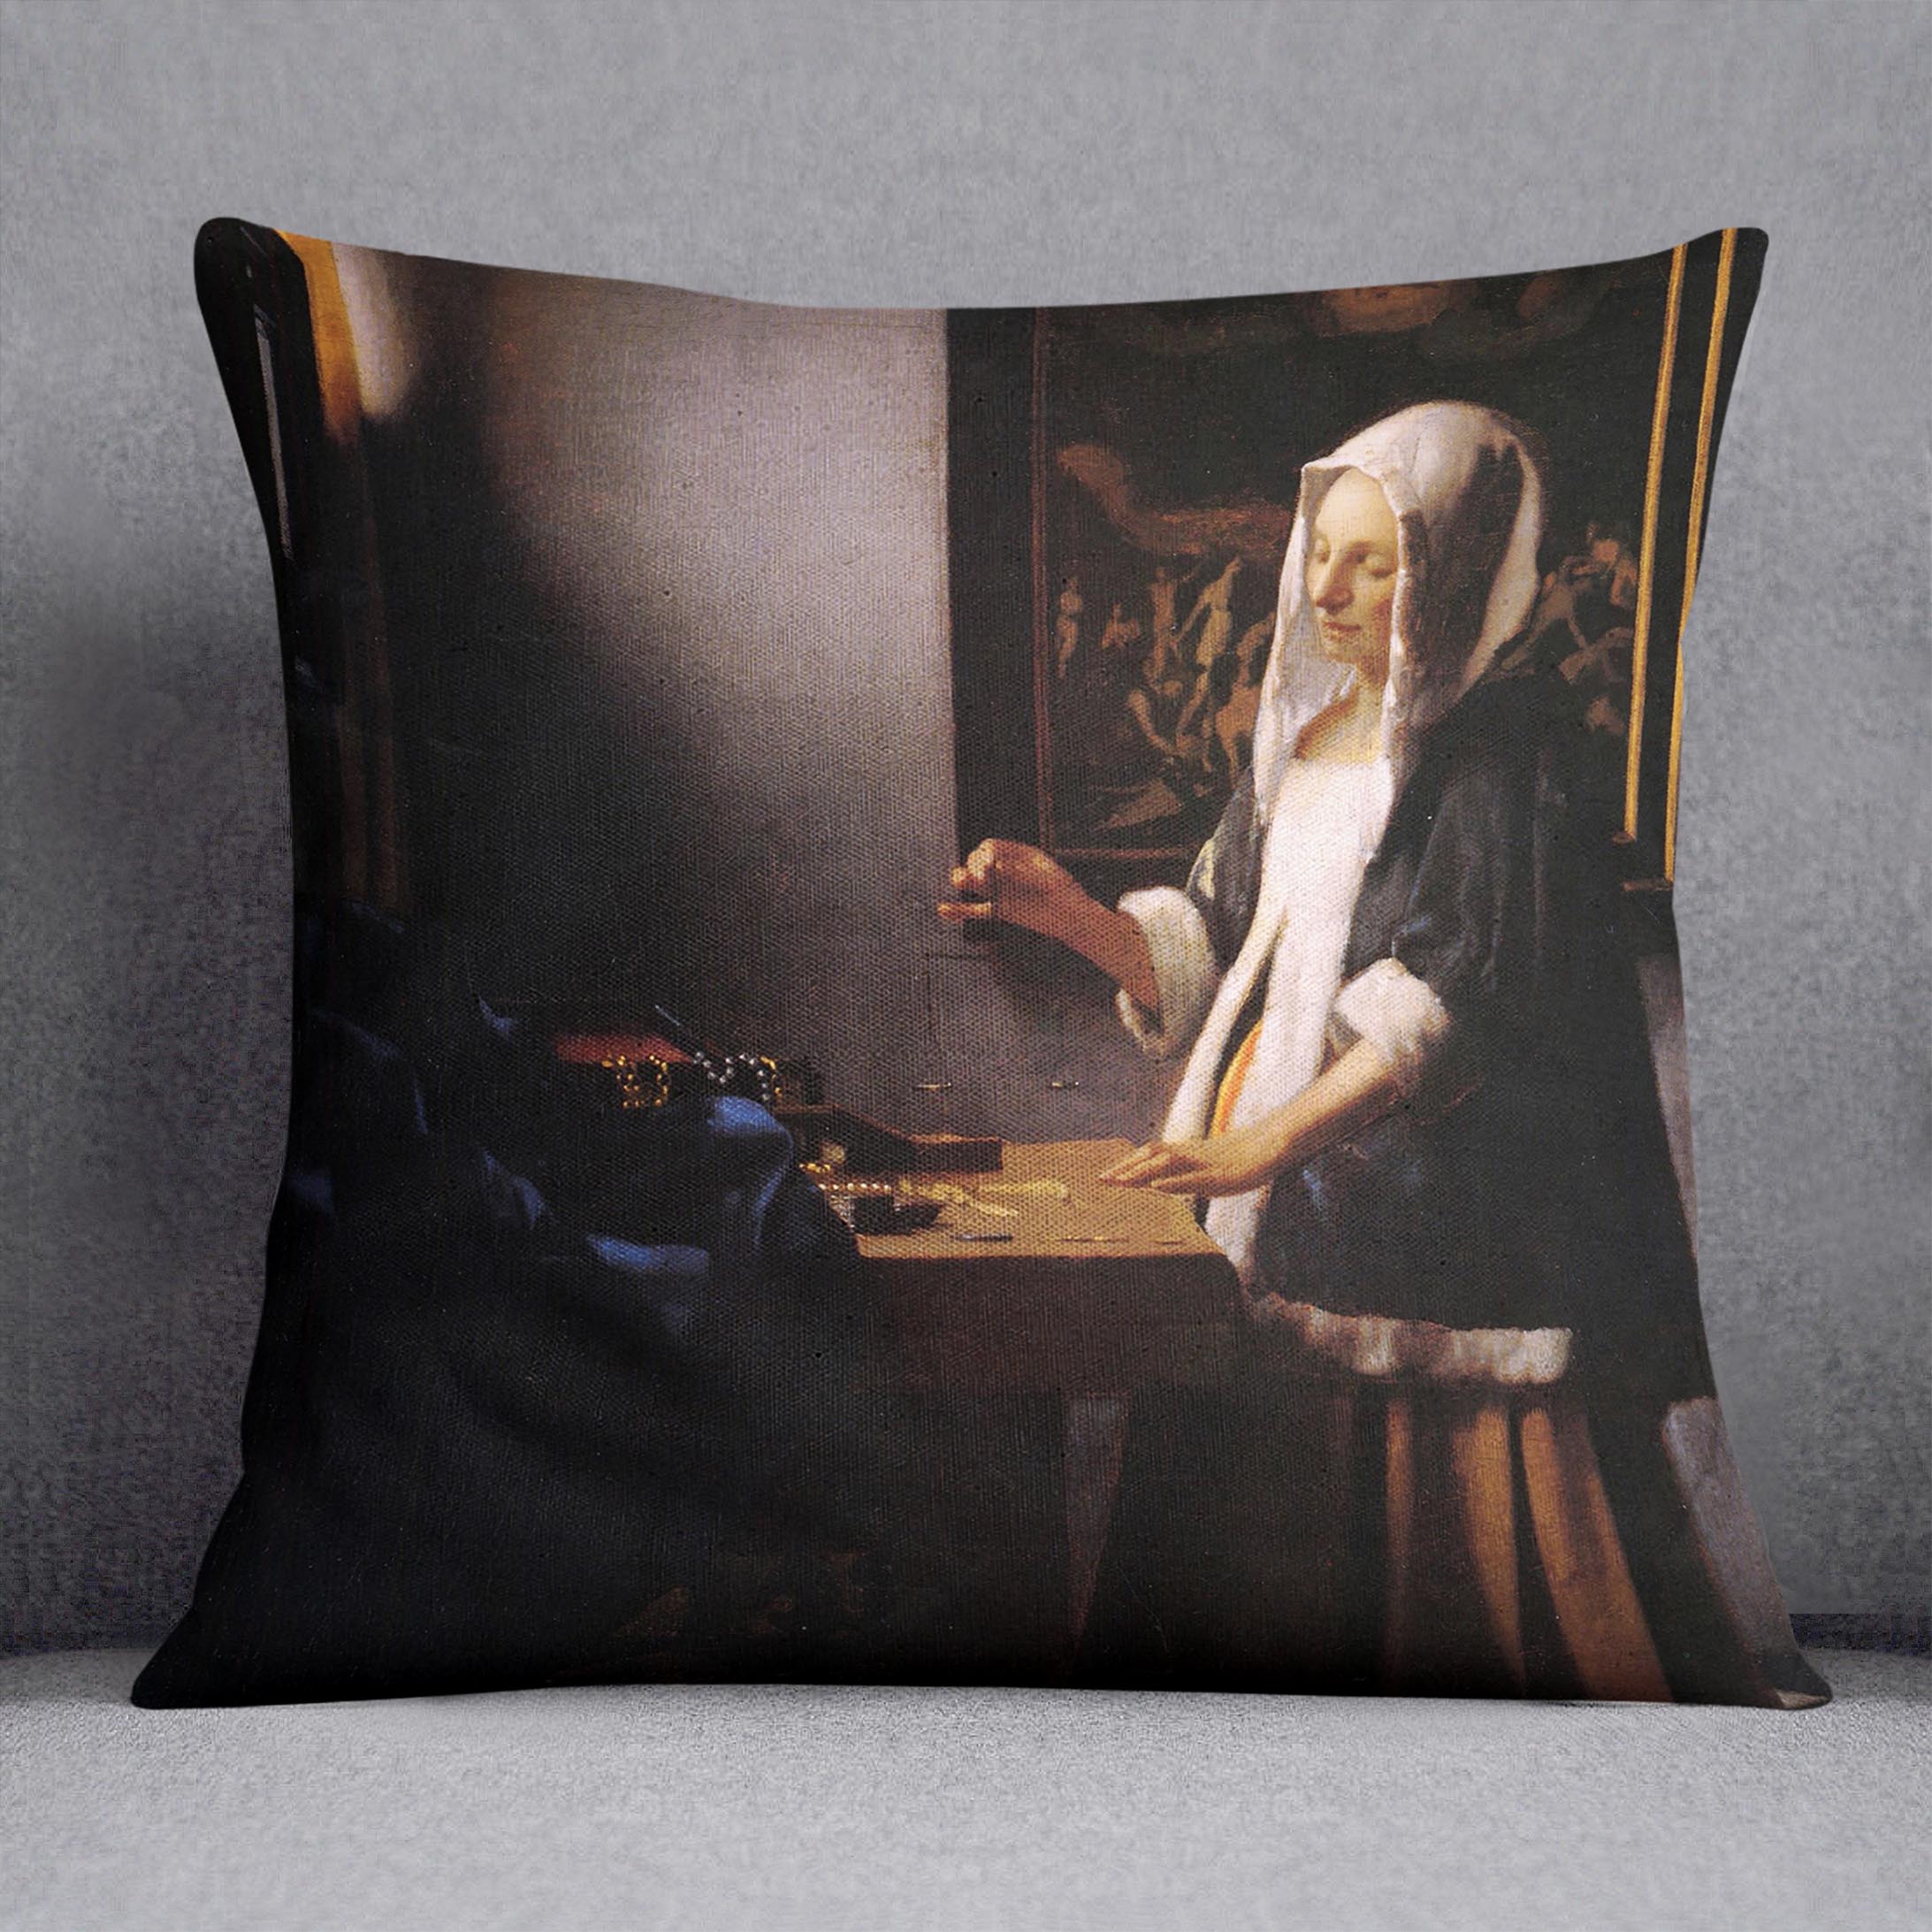 Weights by Vermeer Cushion